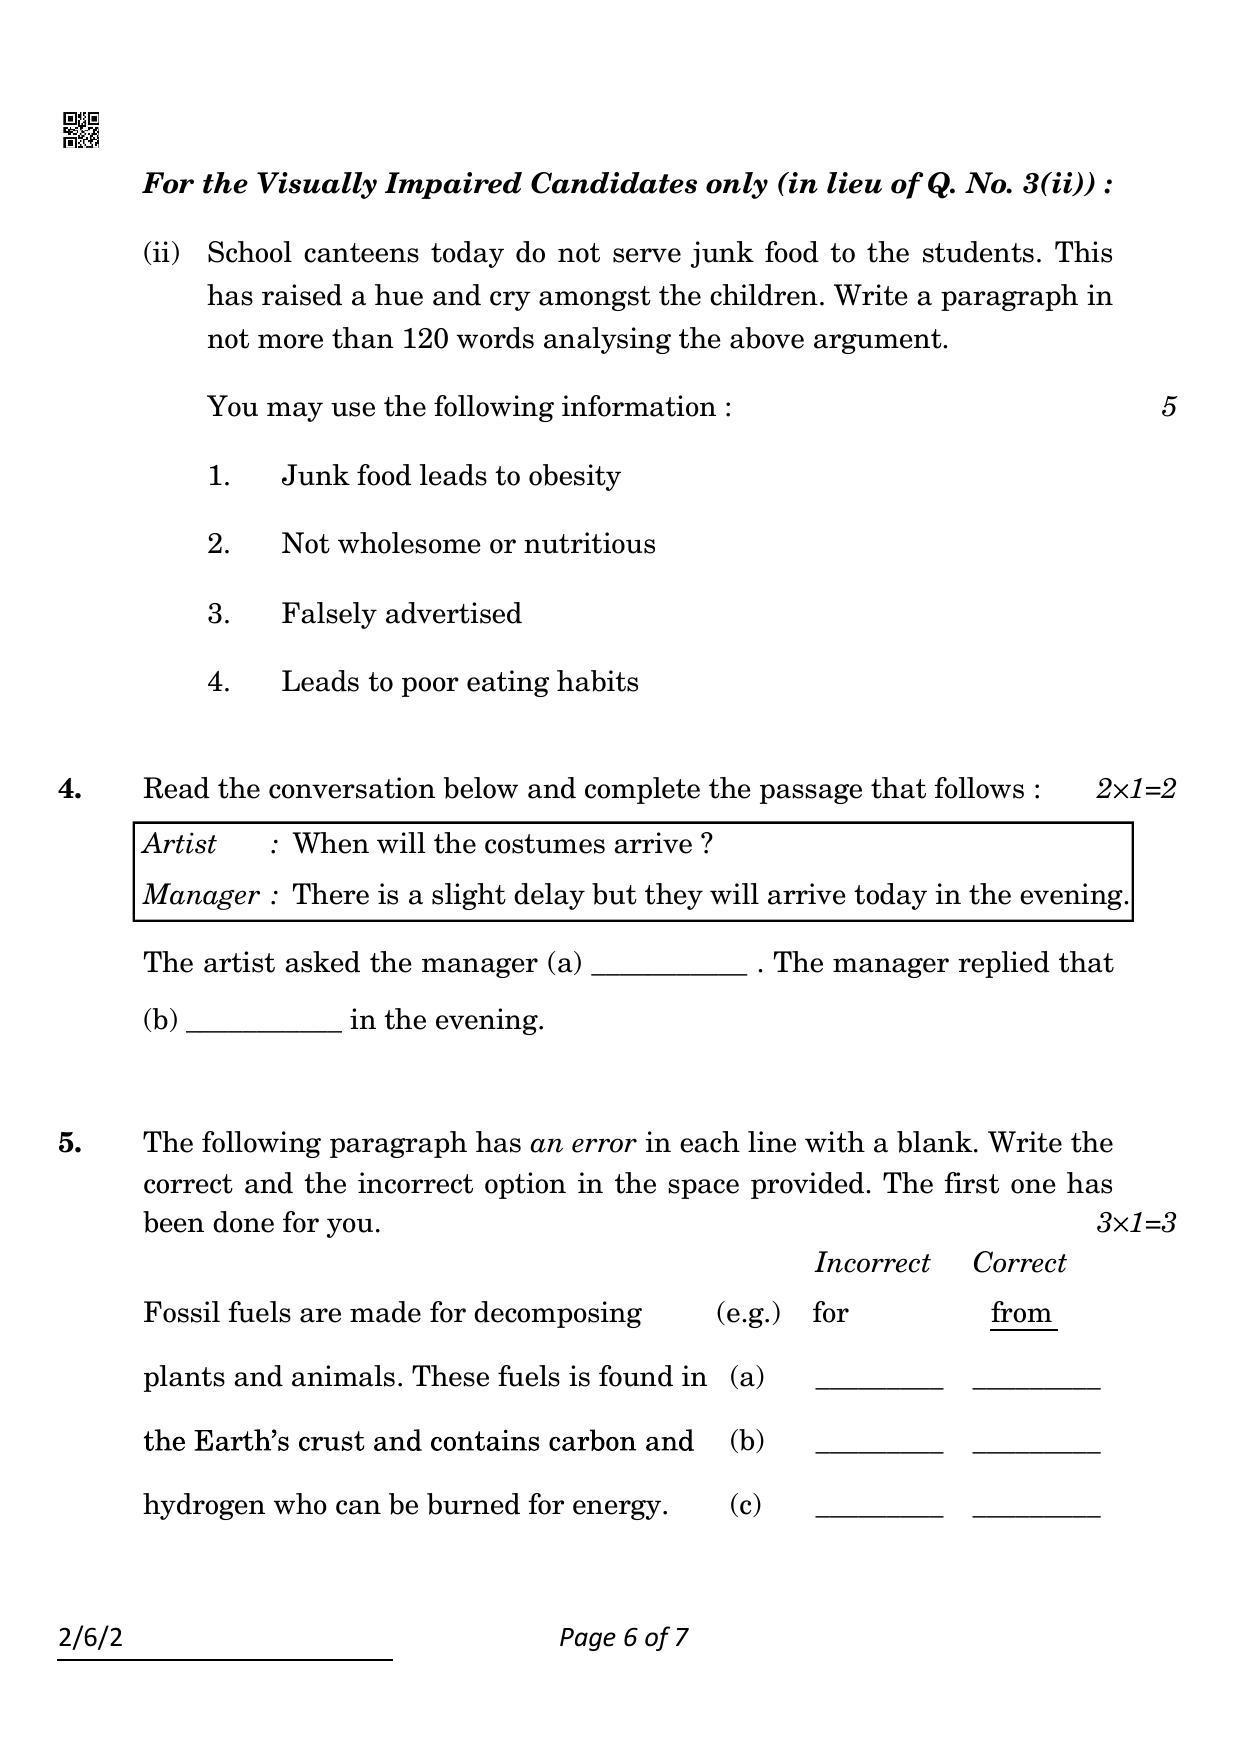 CBSE Class 10 2-6-2_English Language And Literature 2022 Compartment Question Paper - Page 6